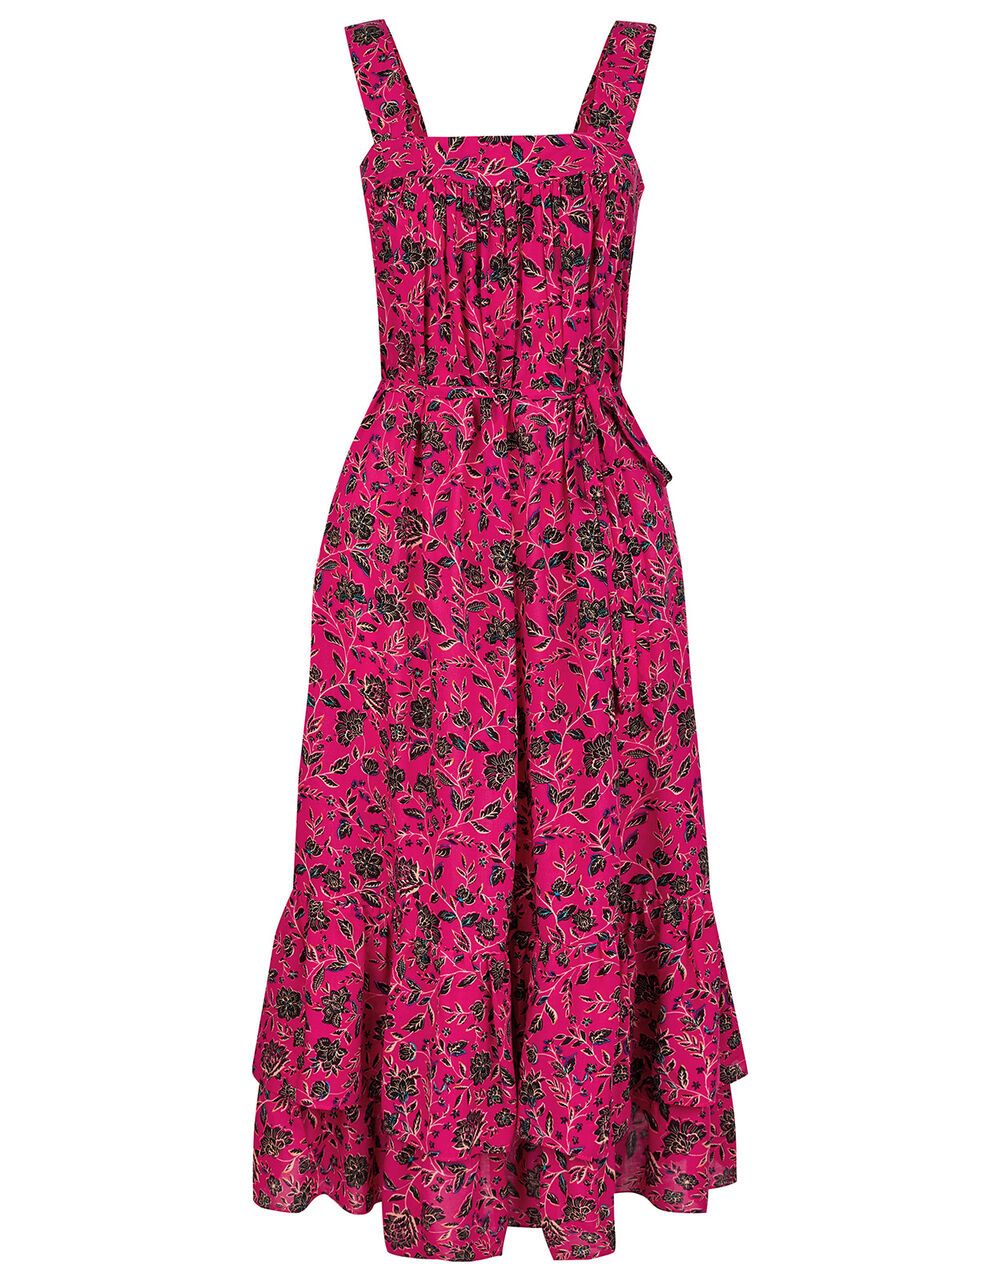 Shiloh Floral Print Tiered Sundress Pink | Casual & Day Dresses ...